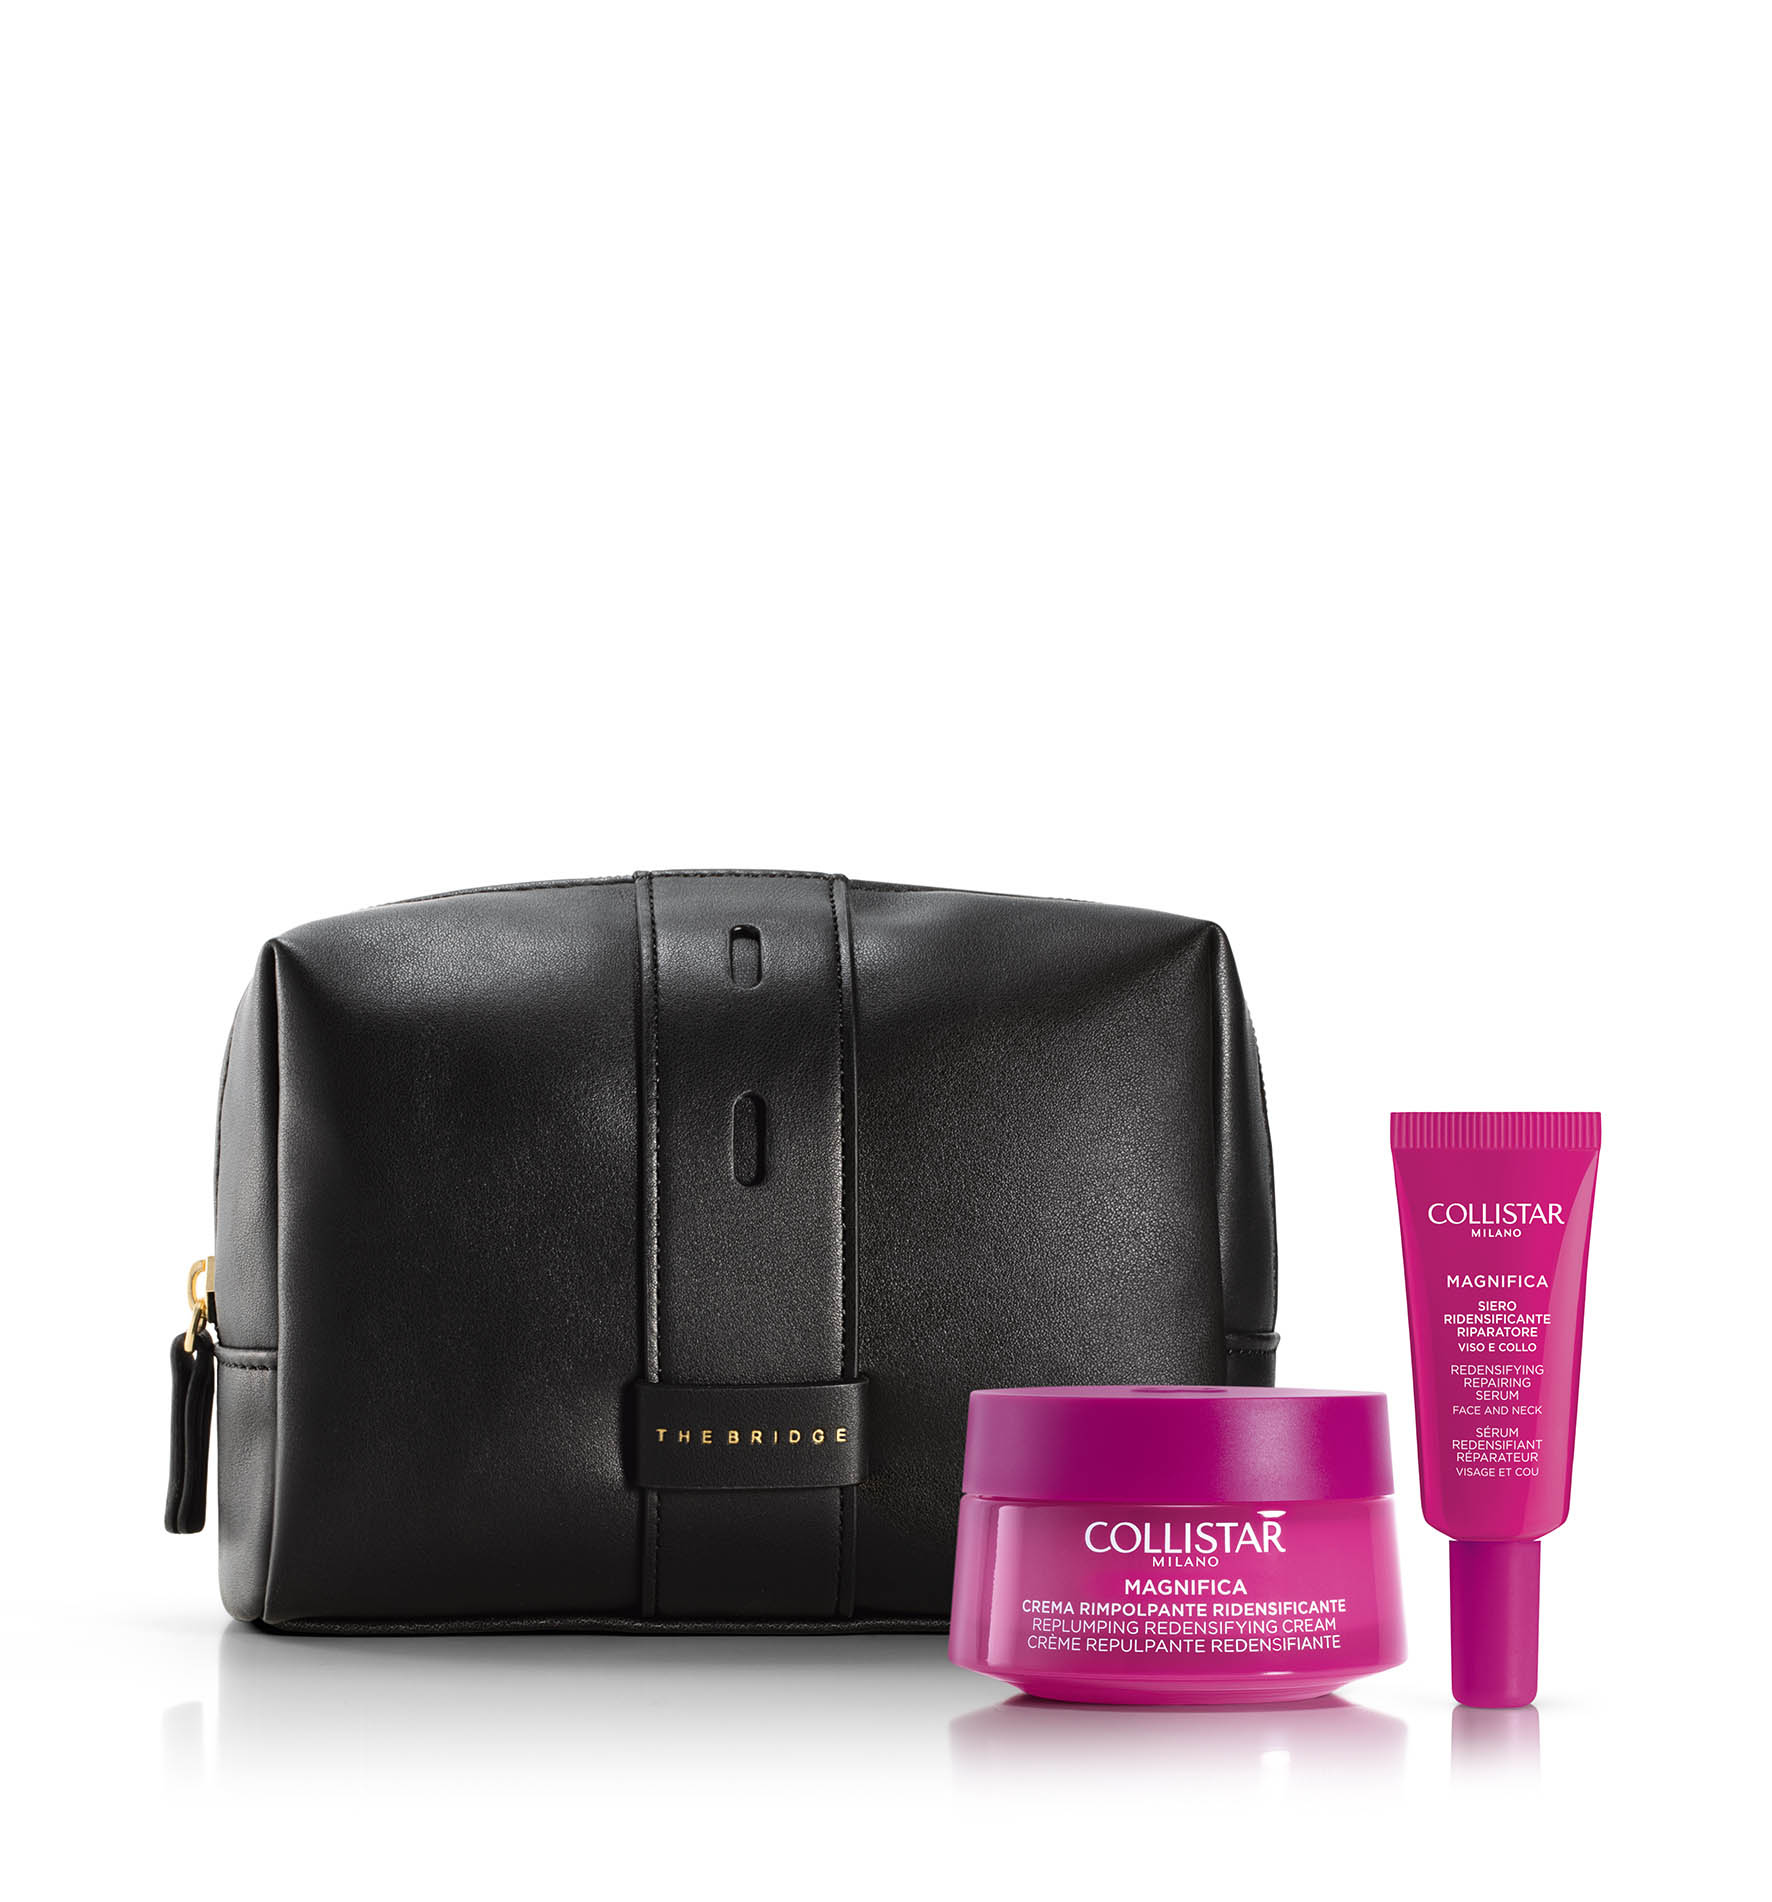 MAGNIFICA REPLUMPING REDENSIFYING CREAM FACE AND NECK SET - For her | Collistar - Shop Online Ufficiale